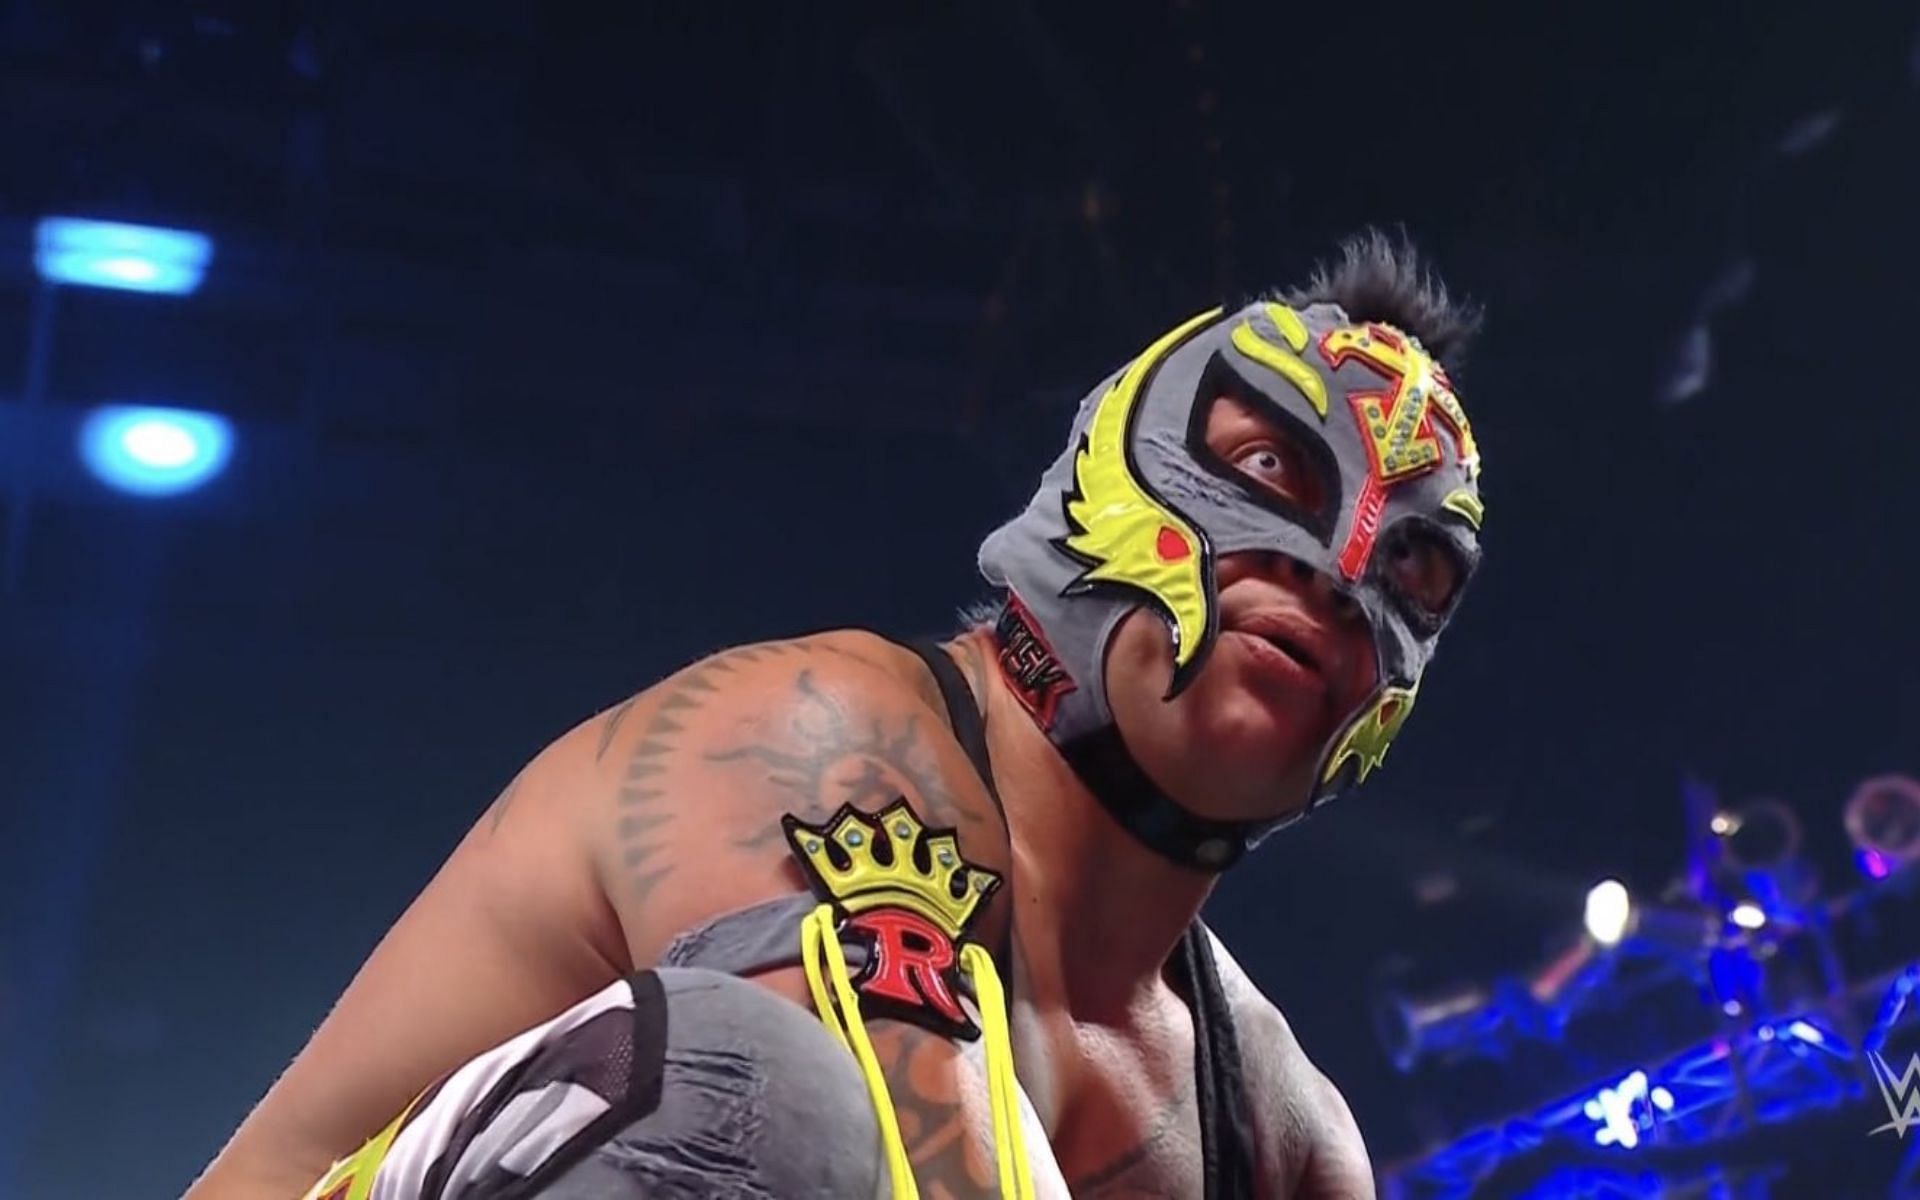 It was a rough night for the lucha legend